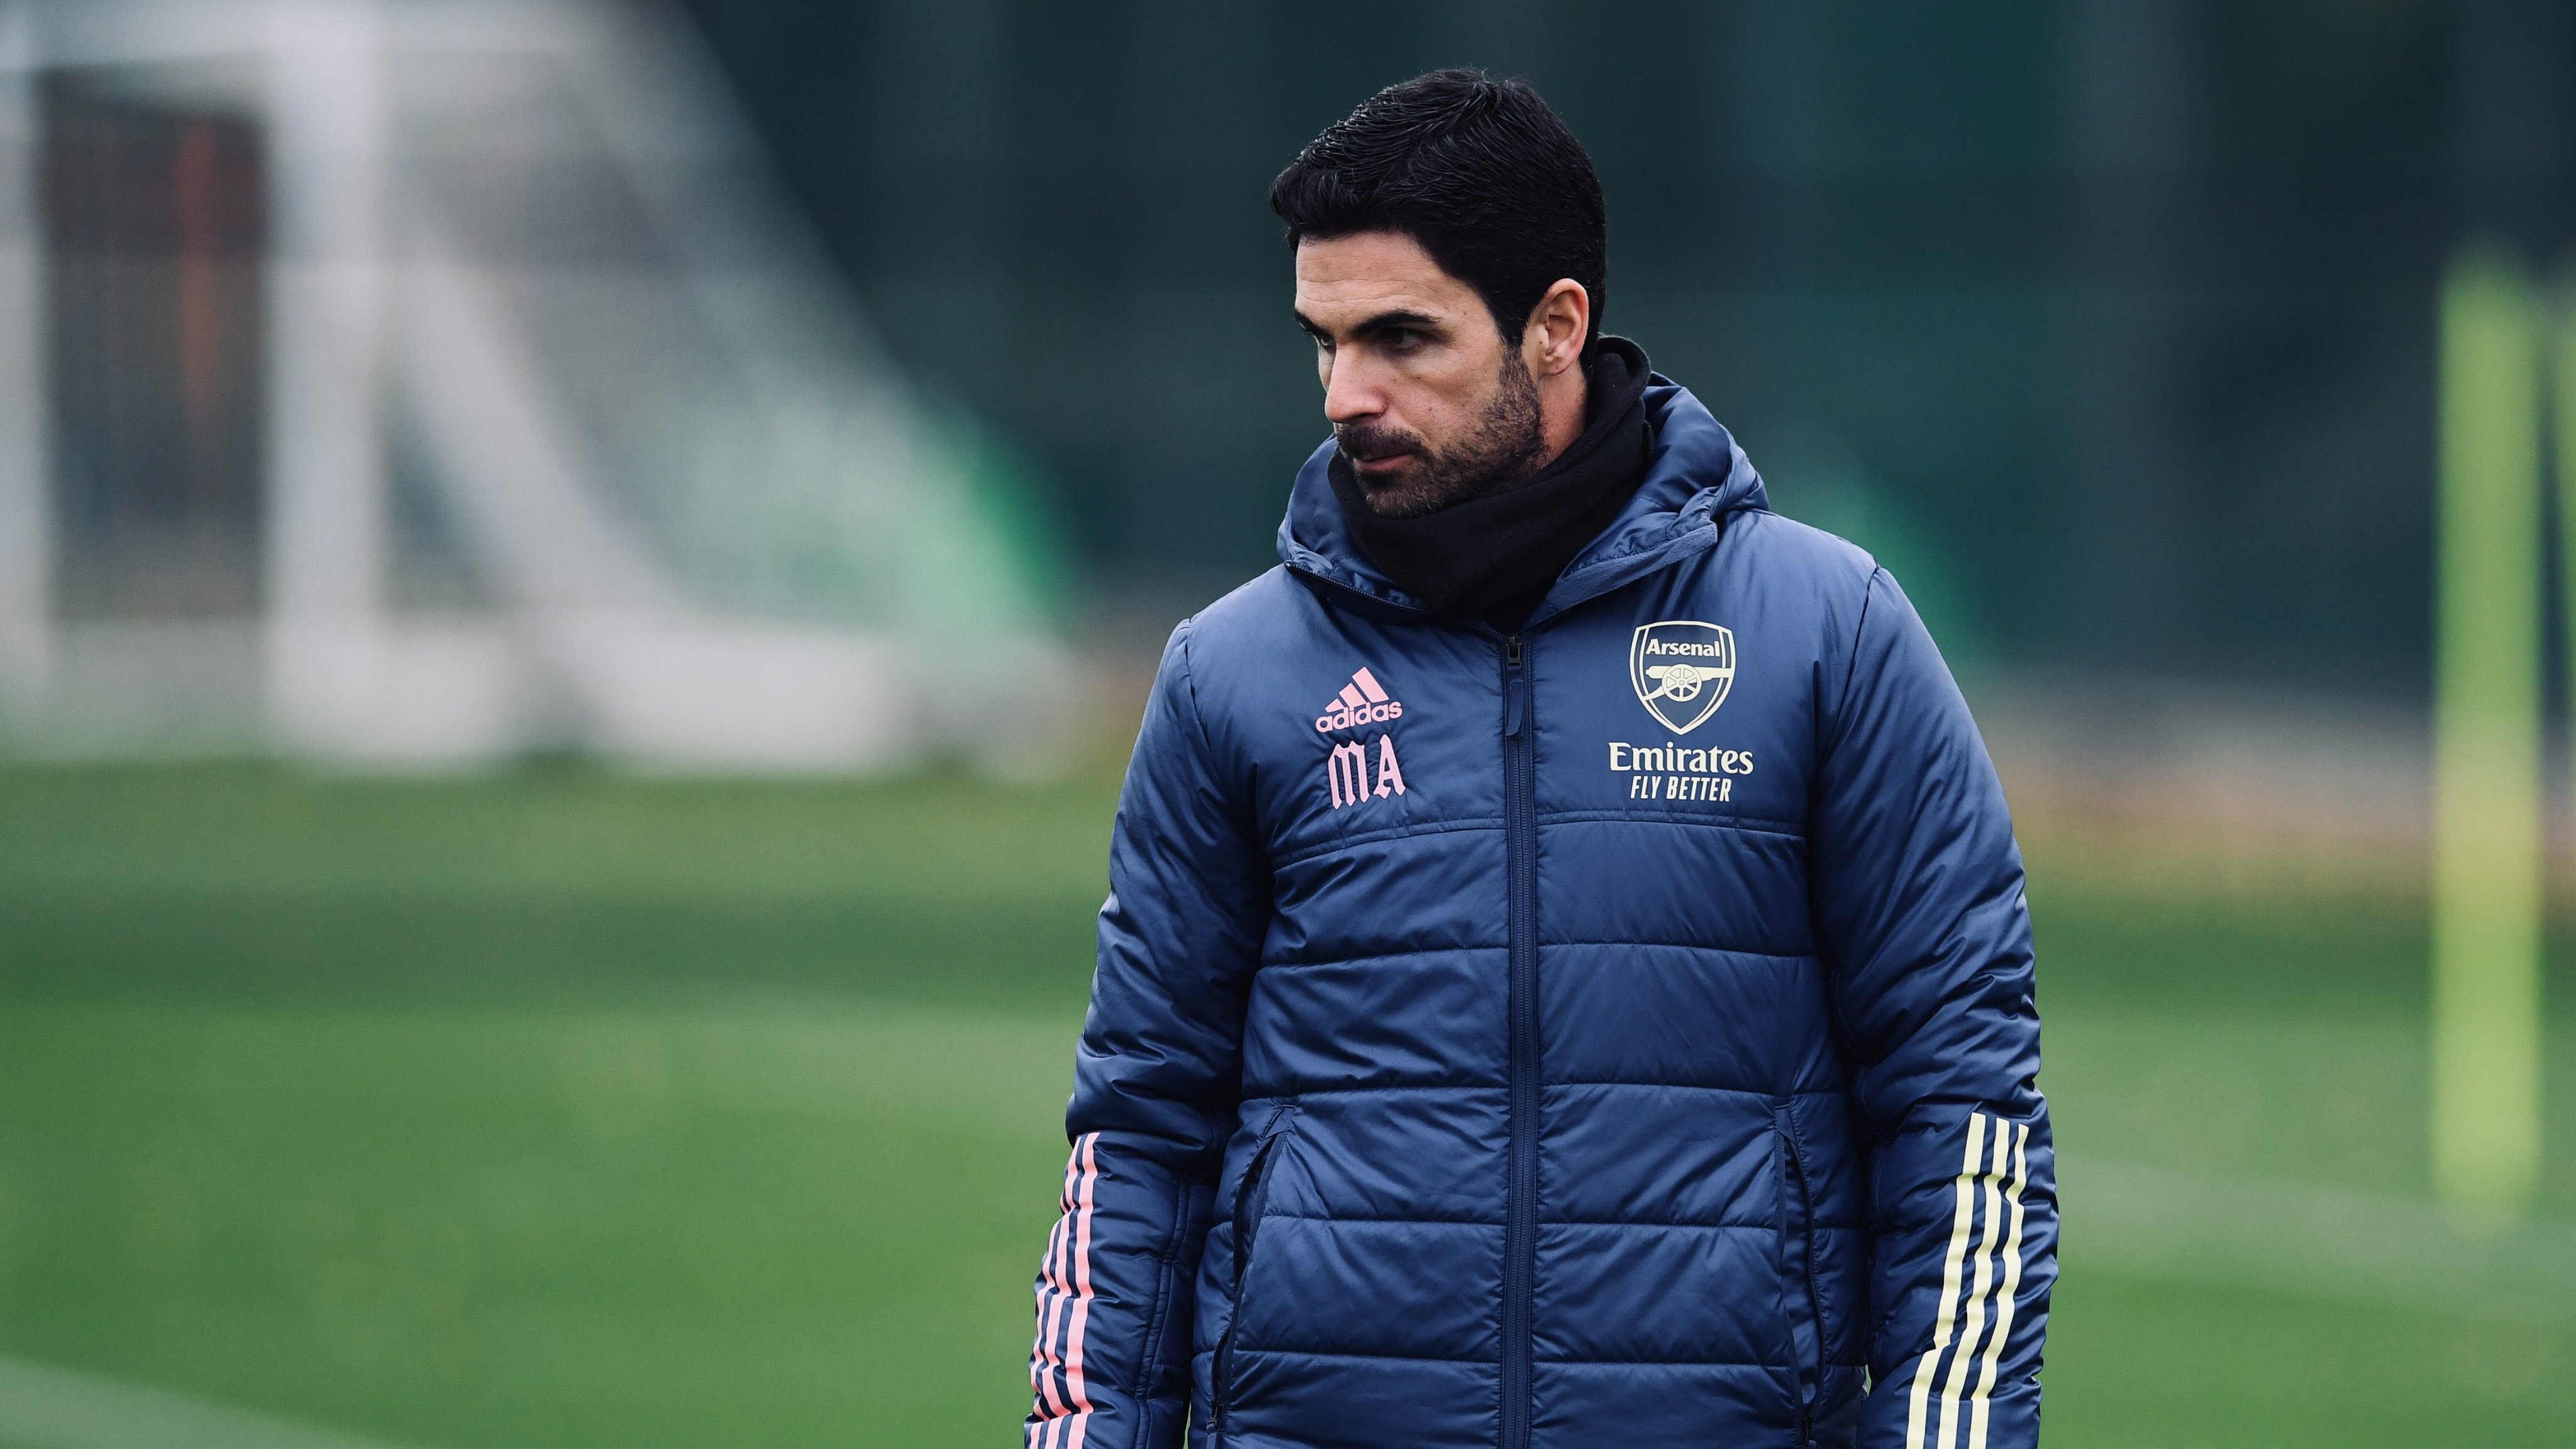 We’re still hoping to do something else if market allows, admits Mikel Arteta